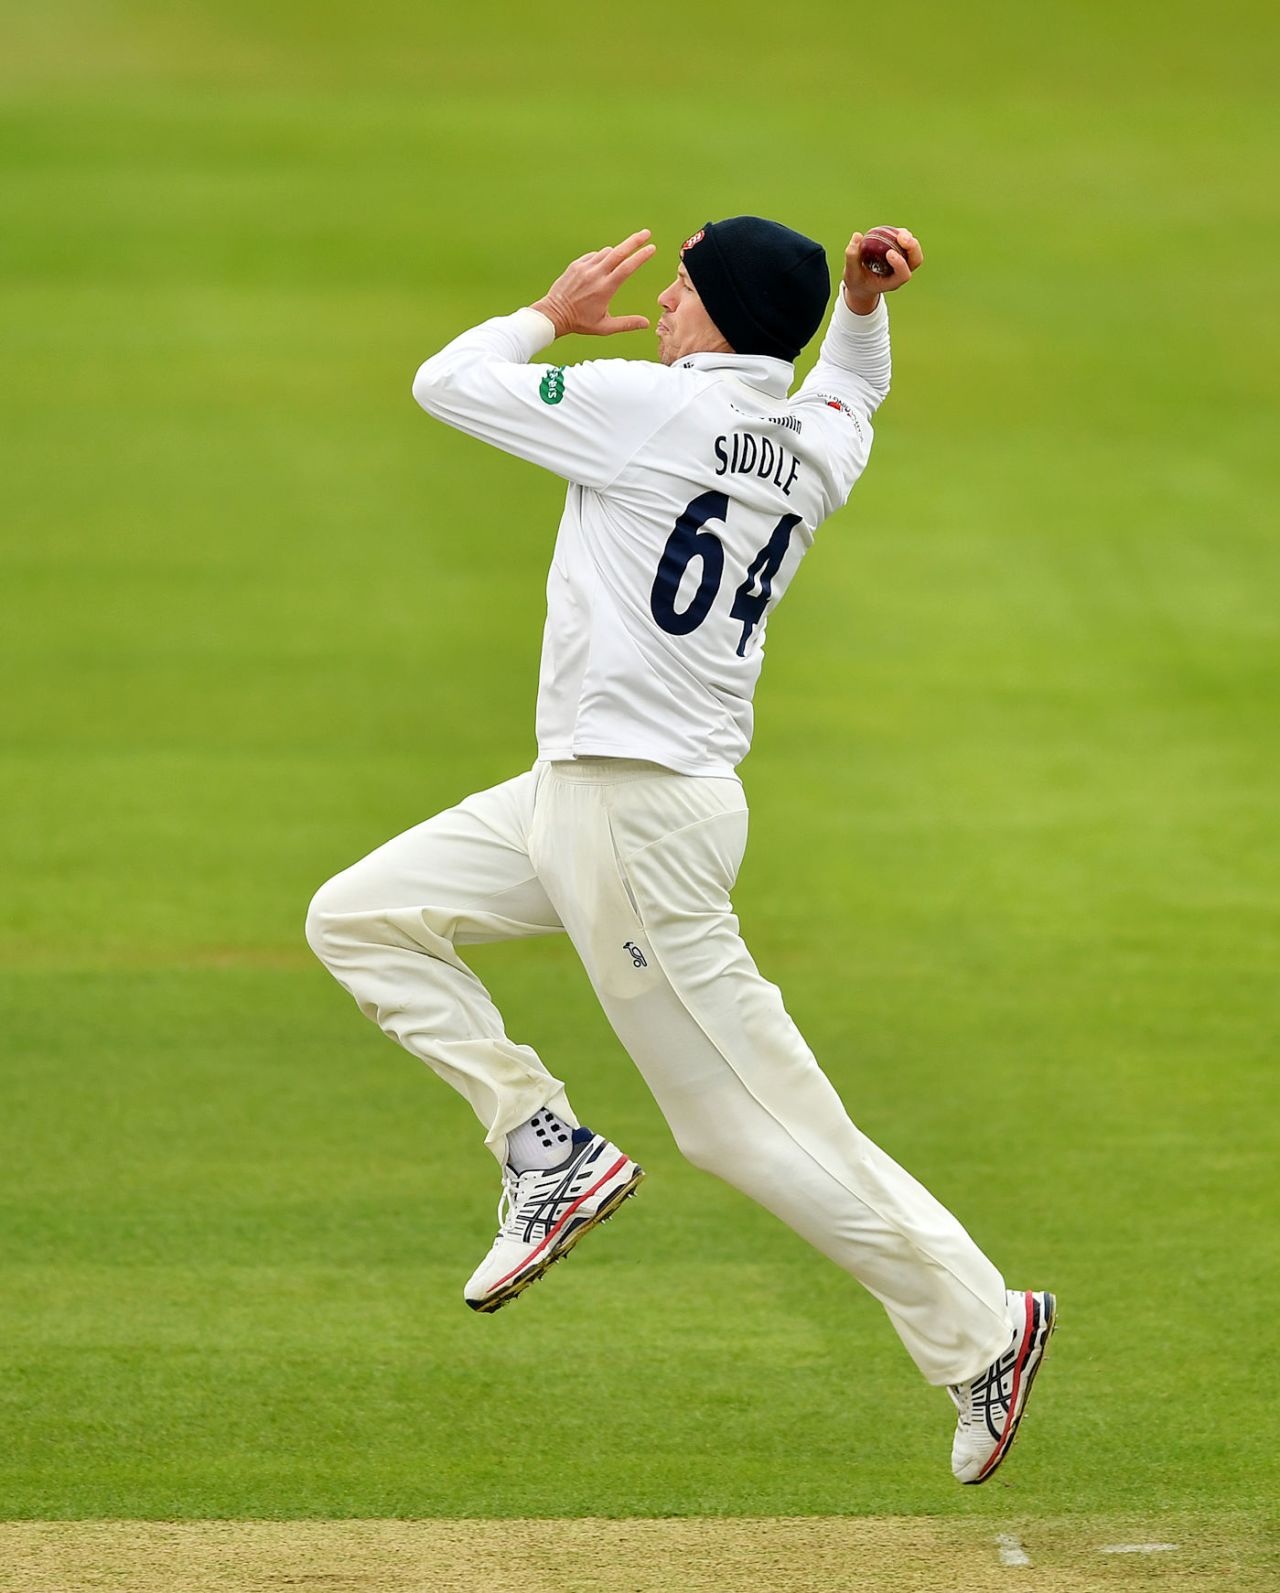 Peter Siddle protects himself against the cold, Hampshire v Essex, Specsavers Championship Division One, Ageas Bowl, April 30, 2018